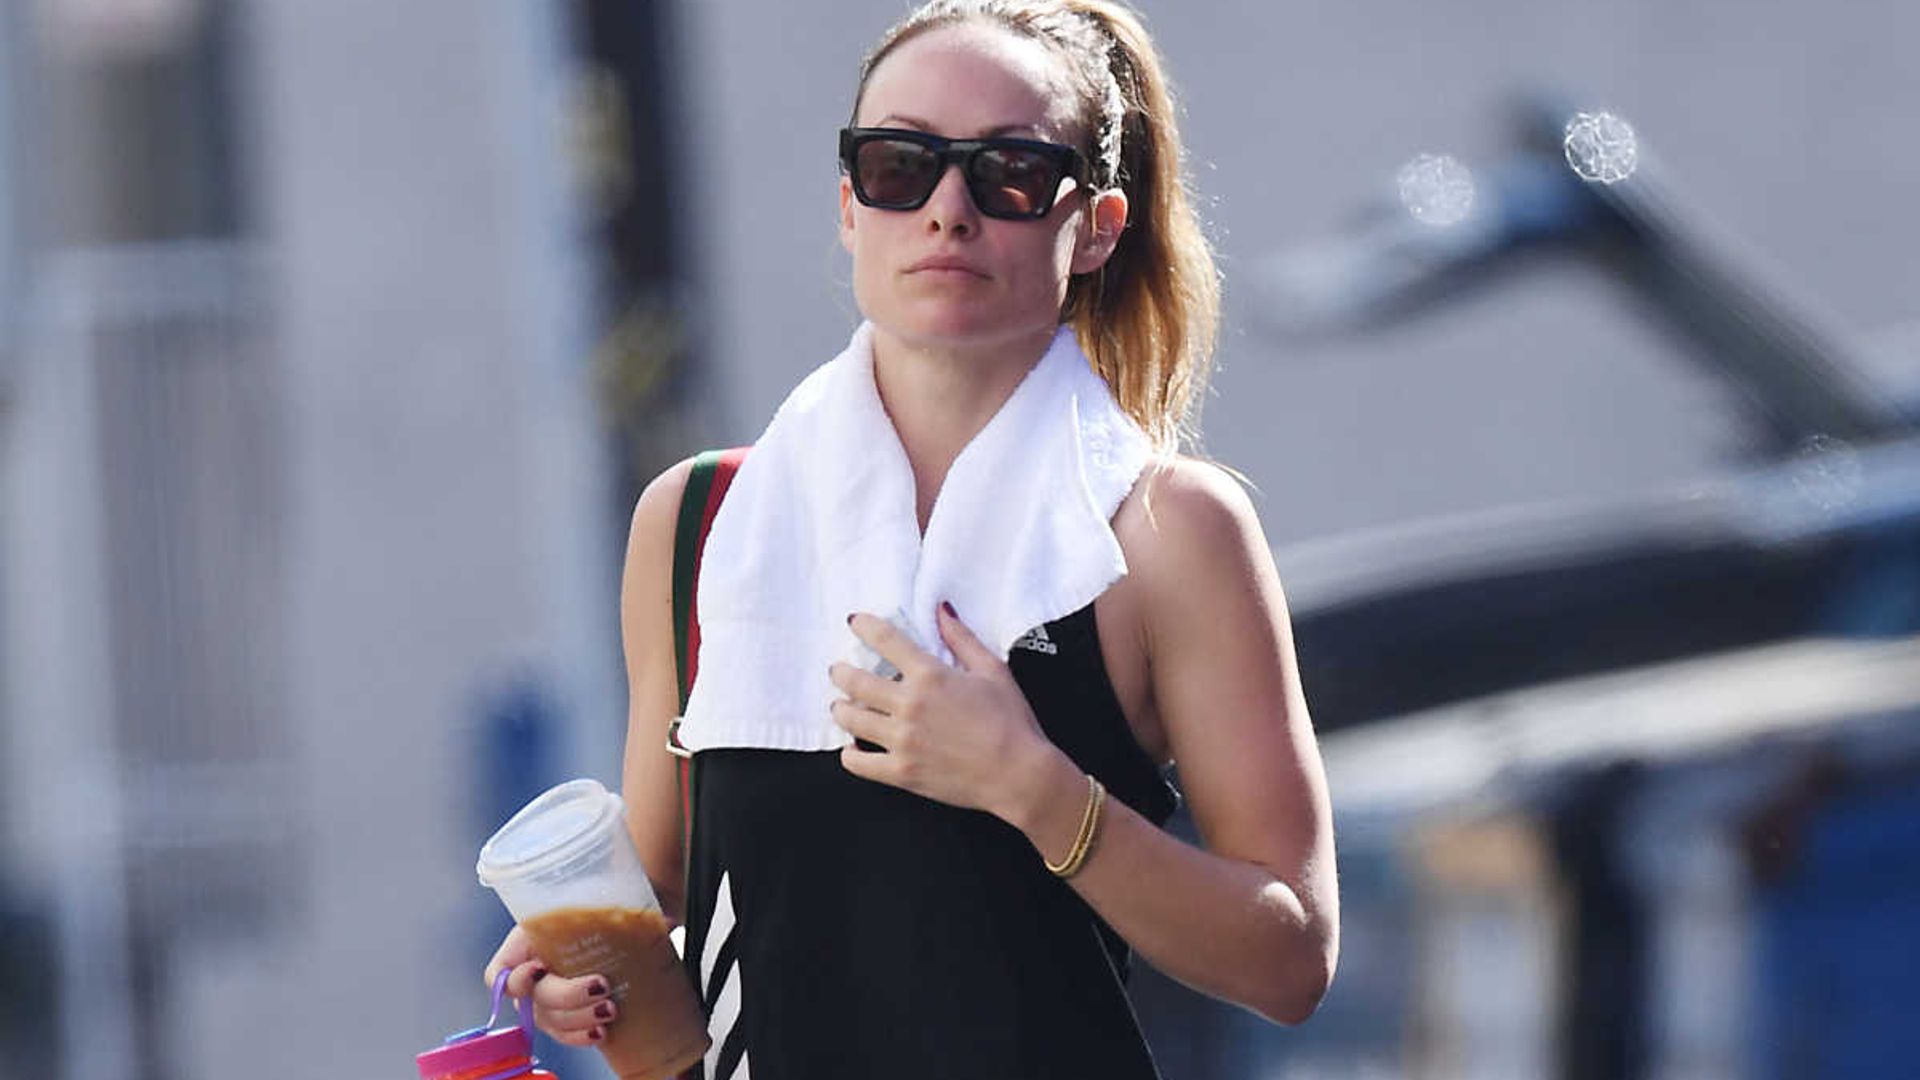 Olivia Wilde just wore Lululemon's comfiest leggings - and they're